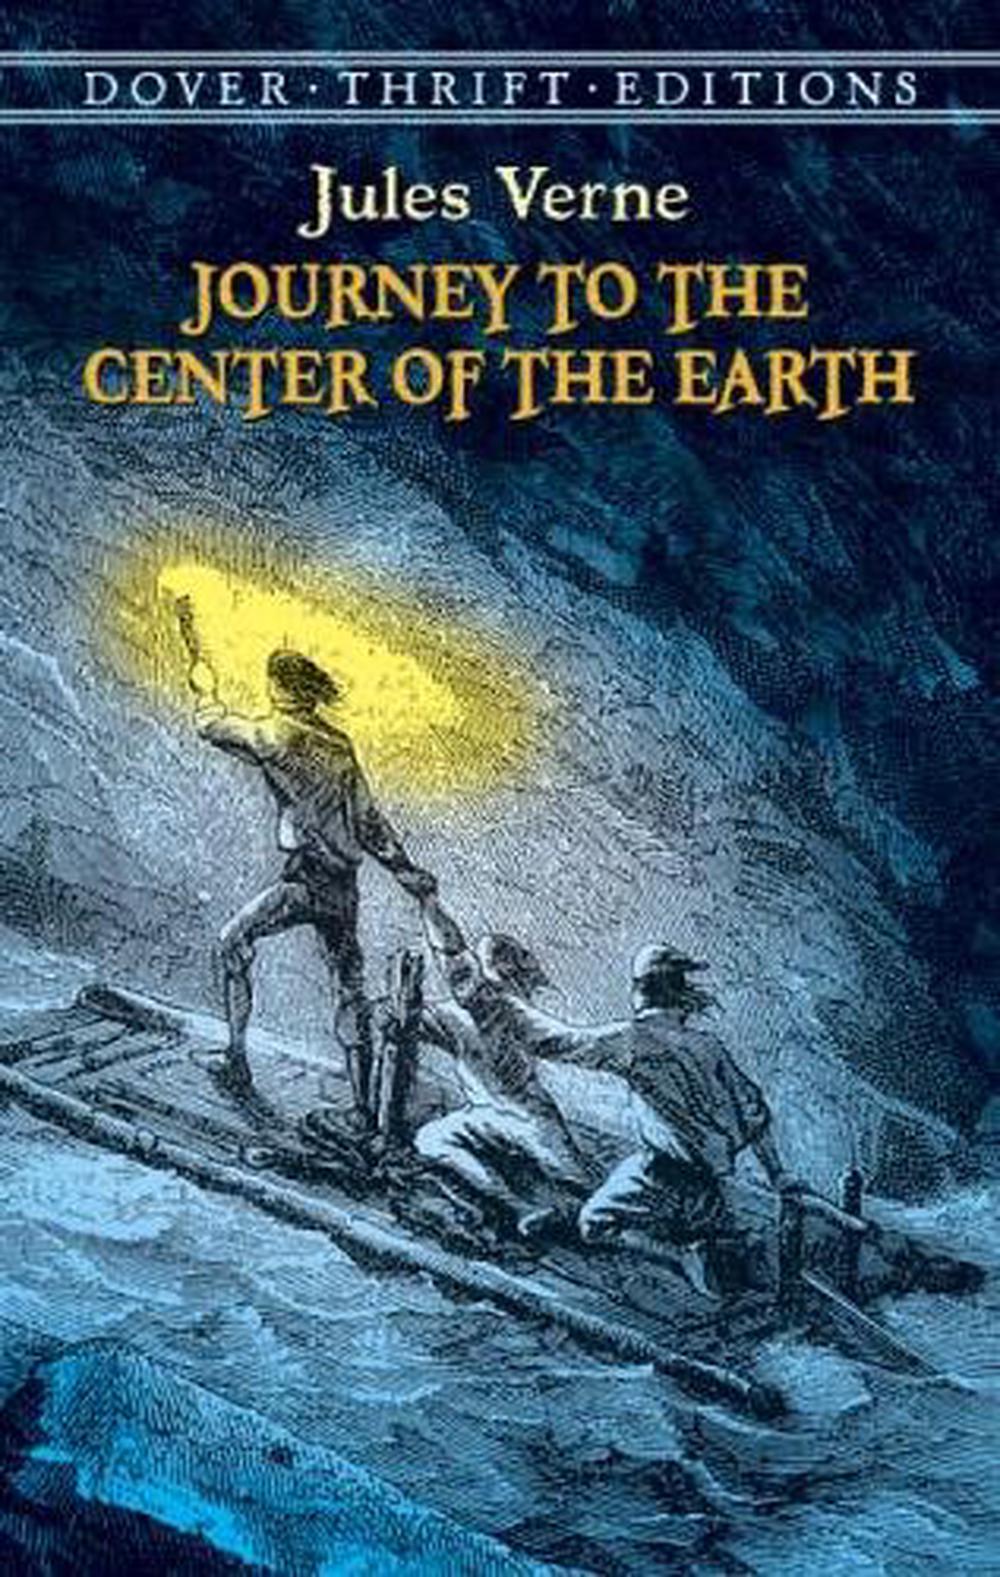 book review journey to the center of the earth